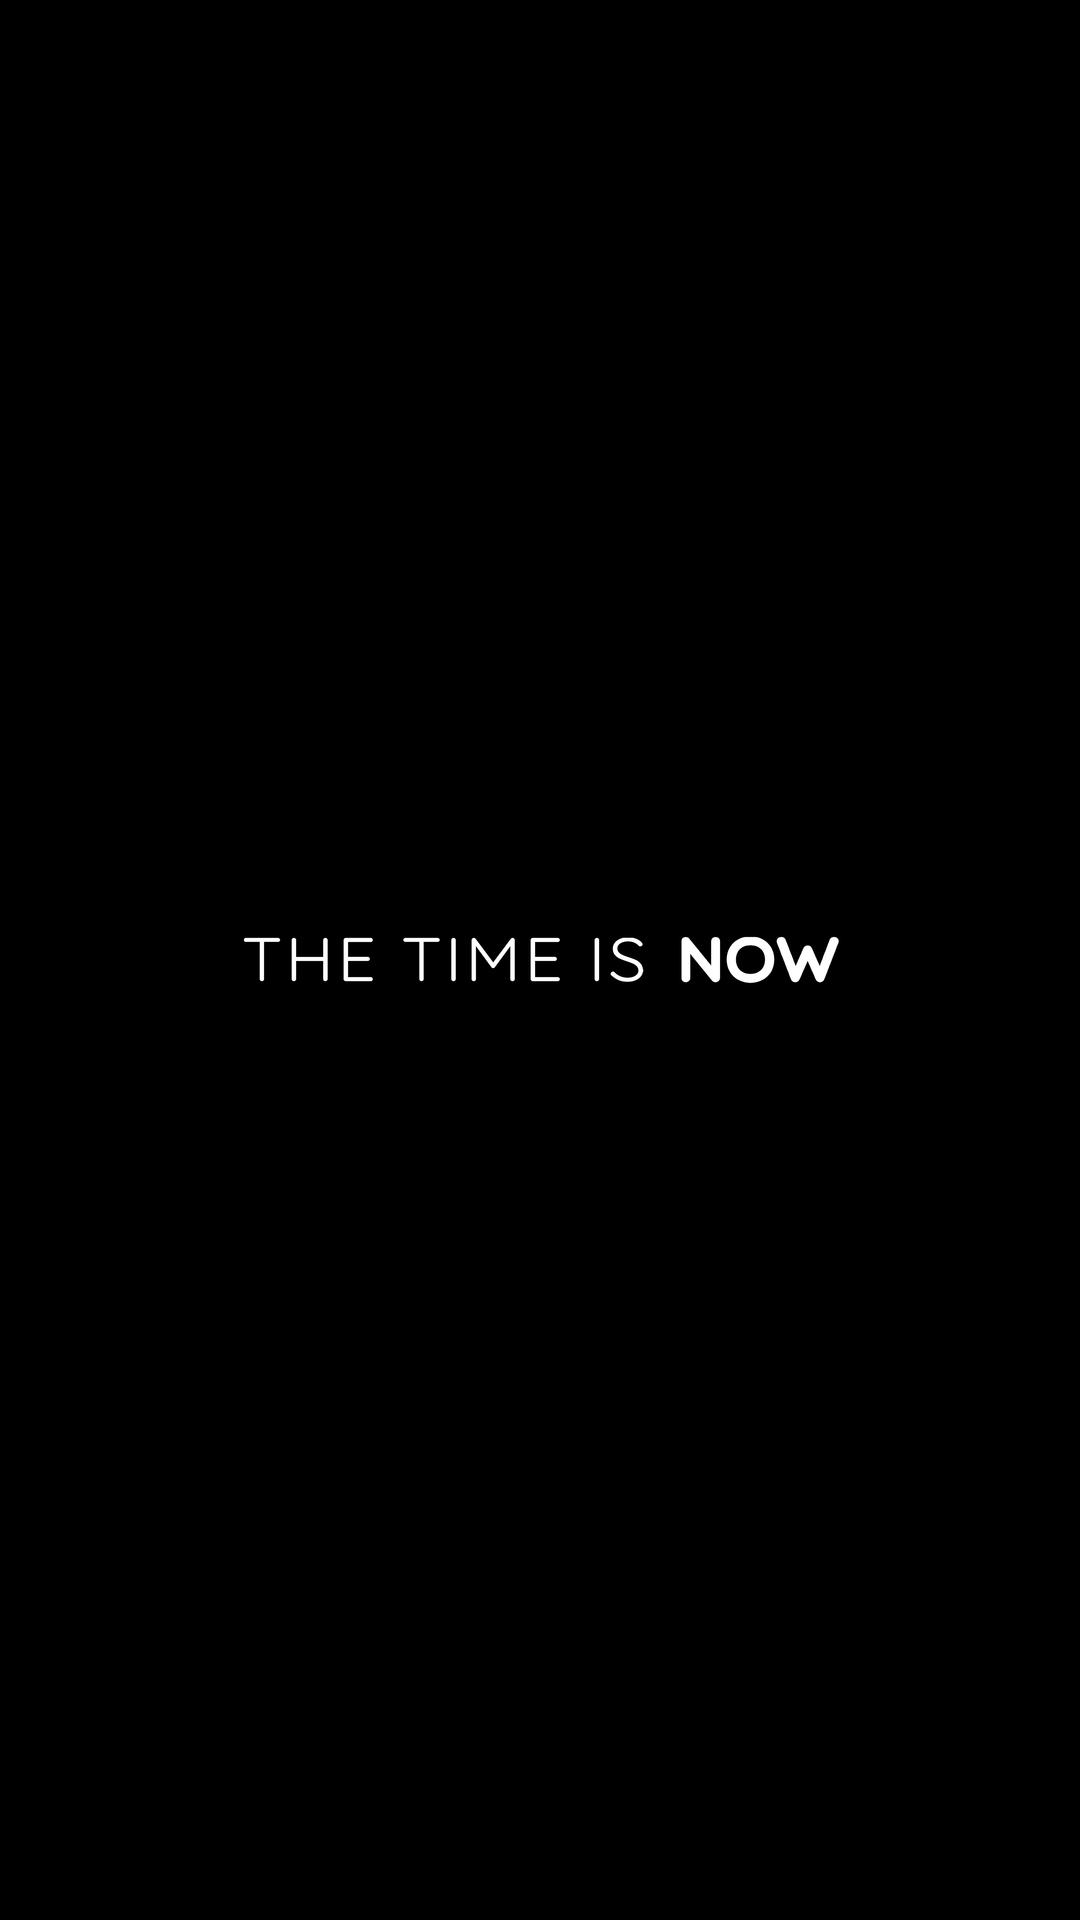 The time is now iPhone Wallpaper HD